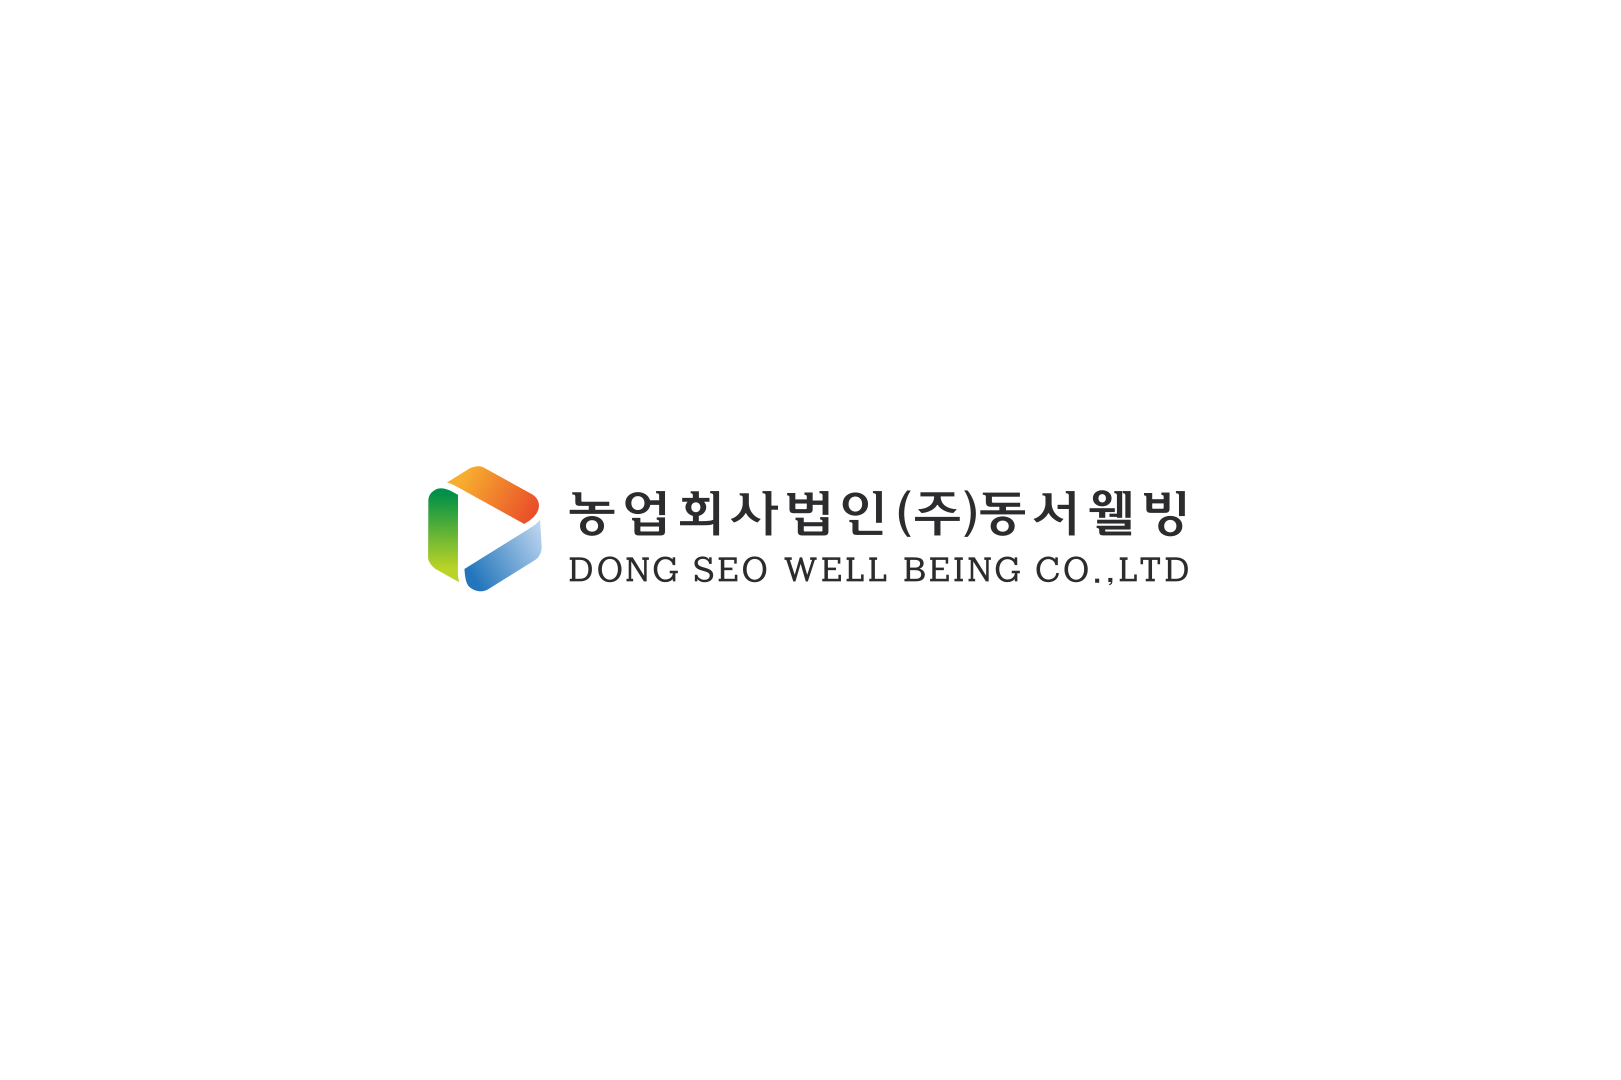 DONGSEO WELL-BEING CO., LTD